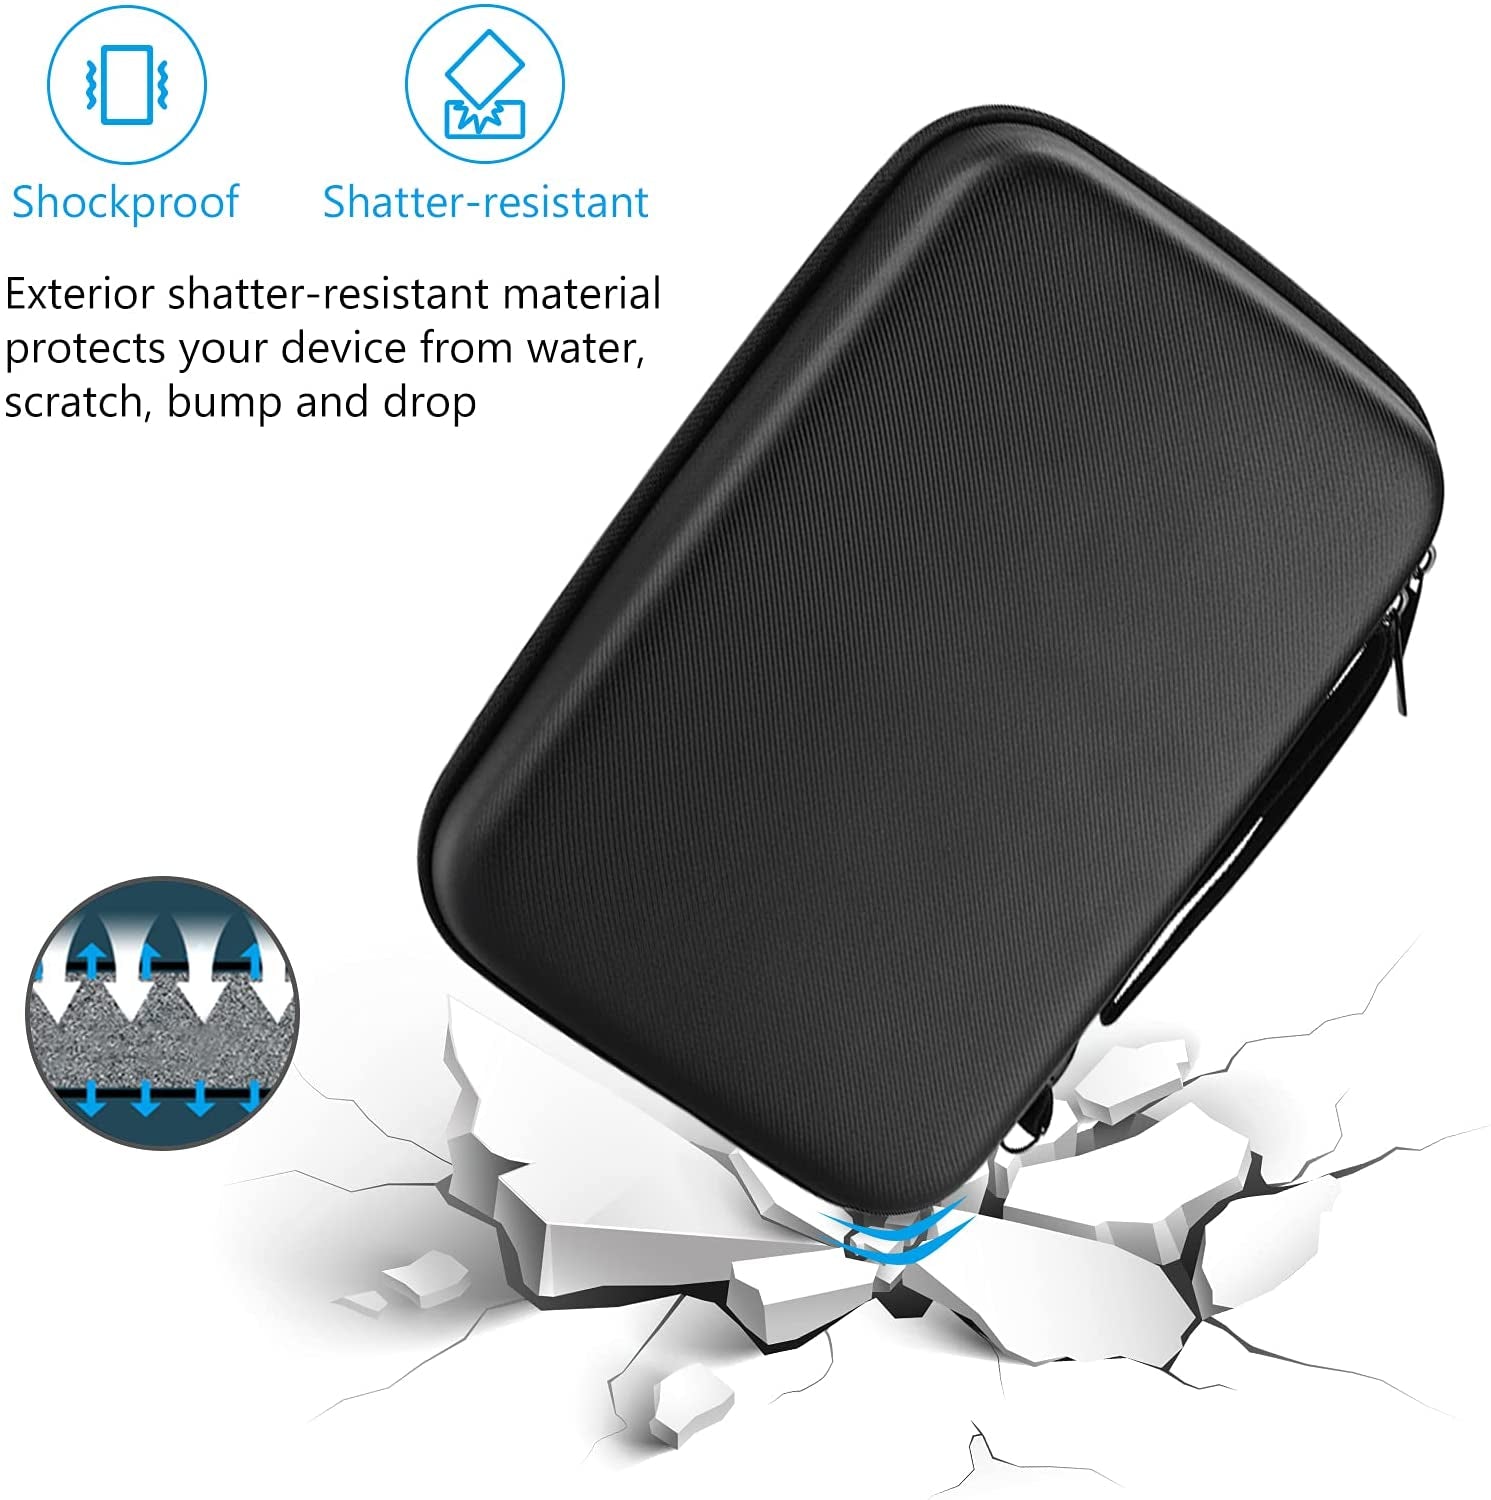 Hard Travel Electronic Organizer Case for Macbook Power Adapter Chargers Cables Power Bank Apple Magic Mouse Apple Pencil USB Flash Disk SD Card Small Portable Accessories Bag -Black